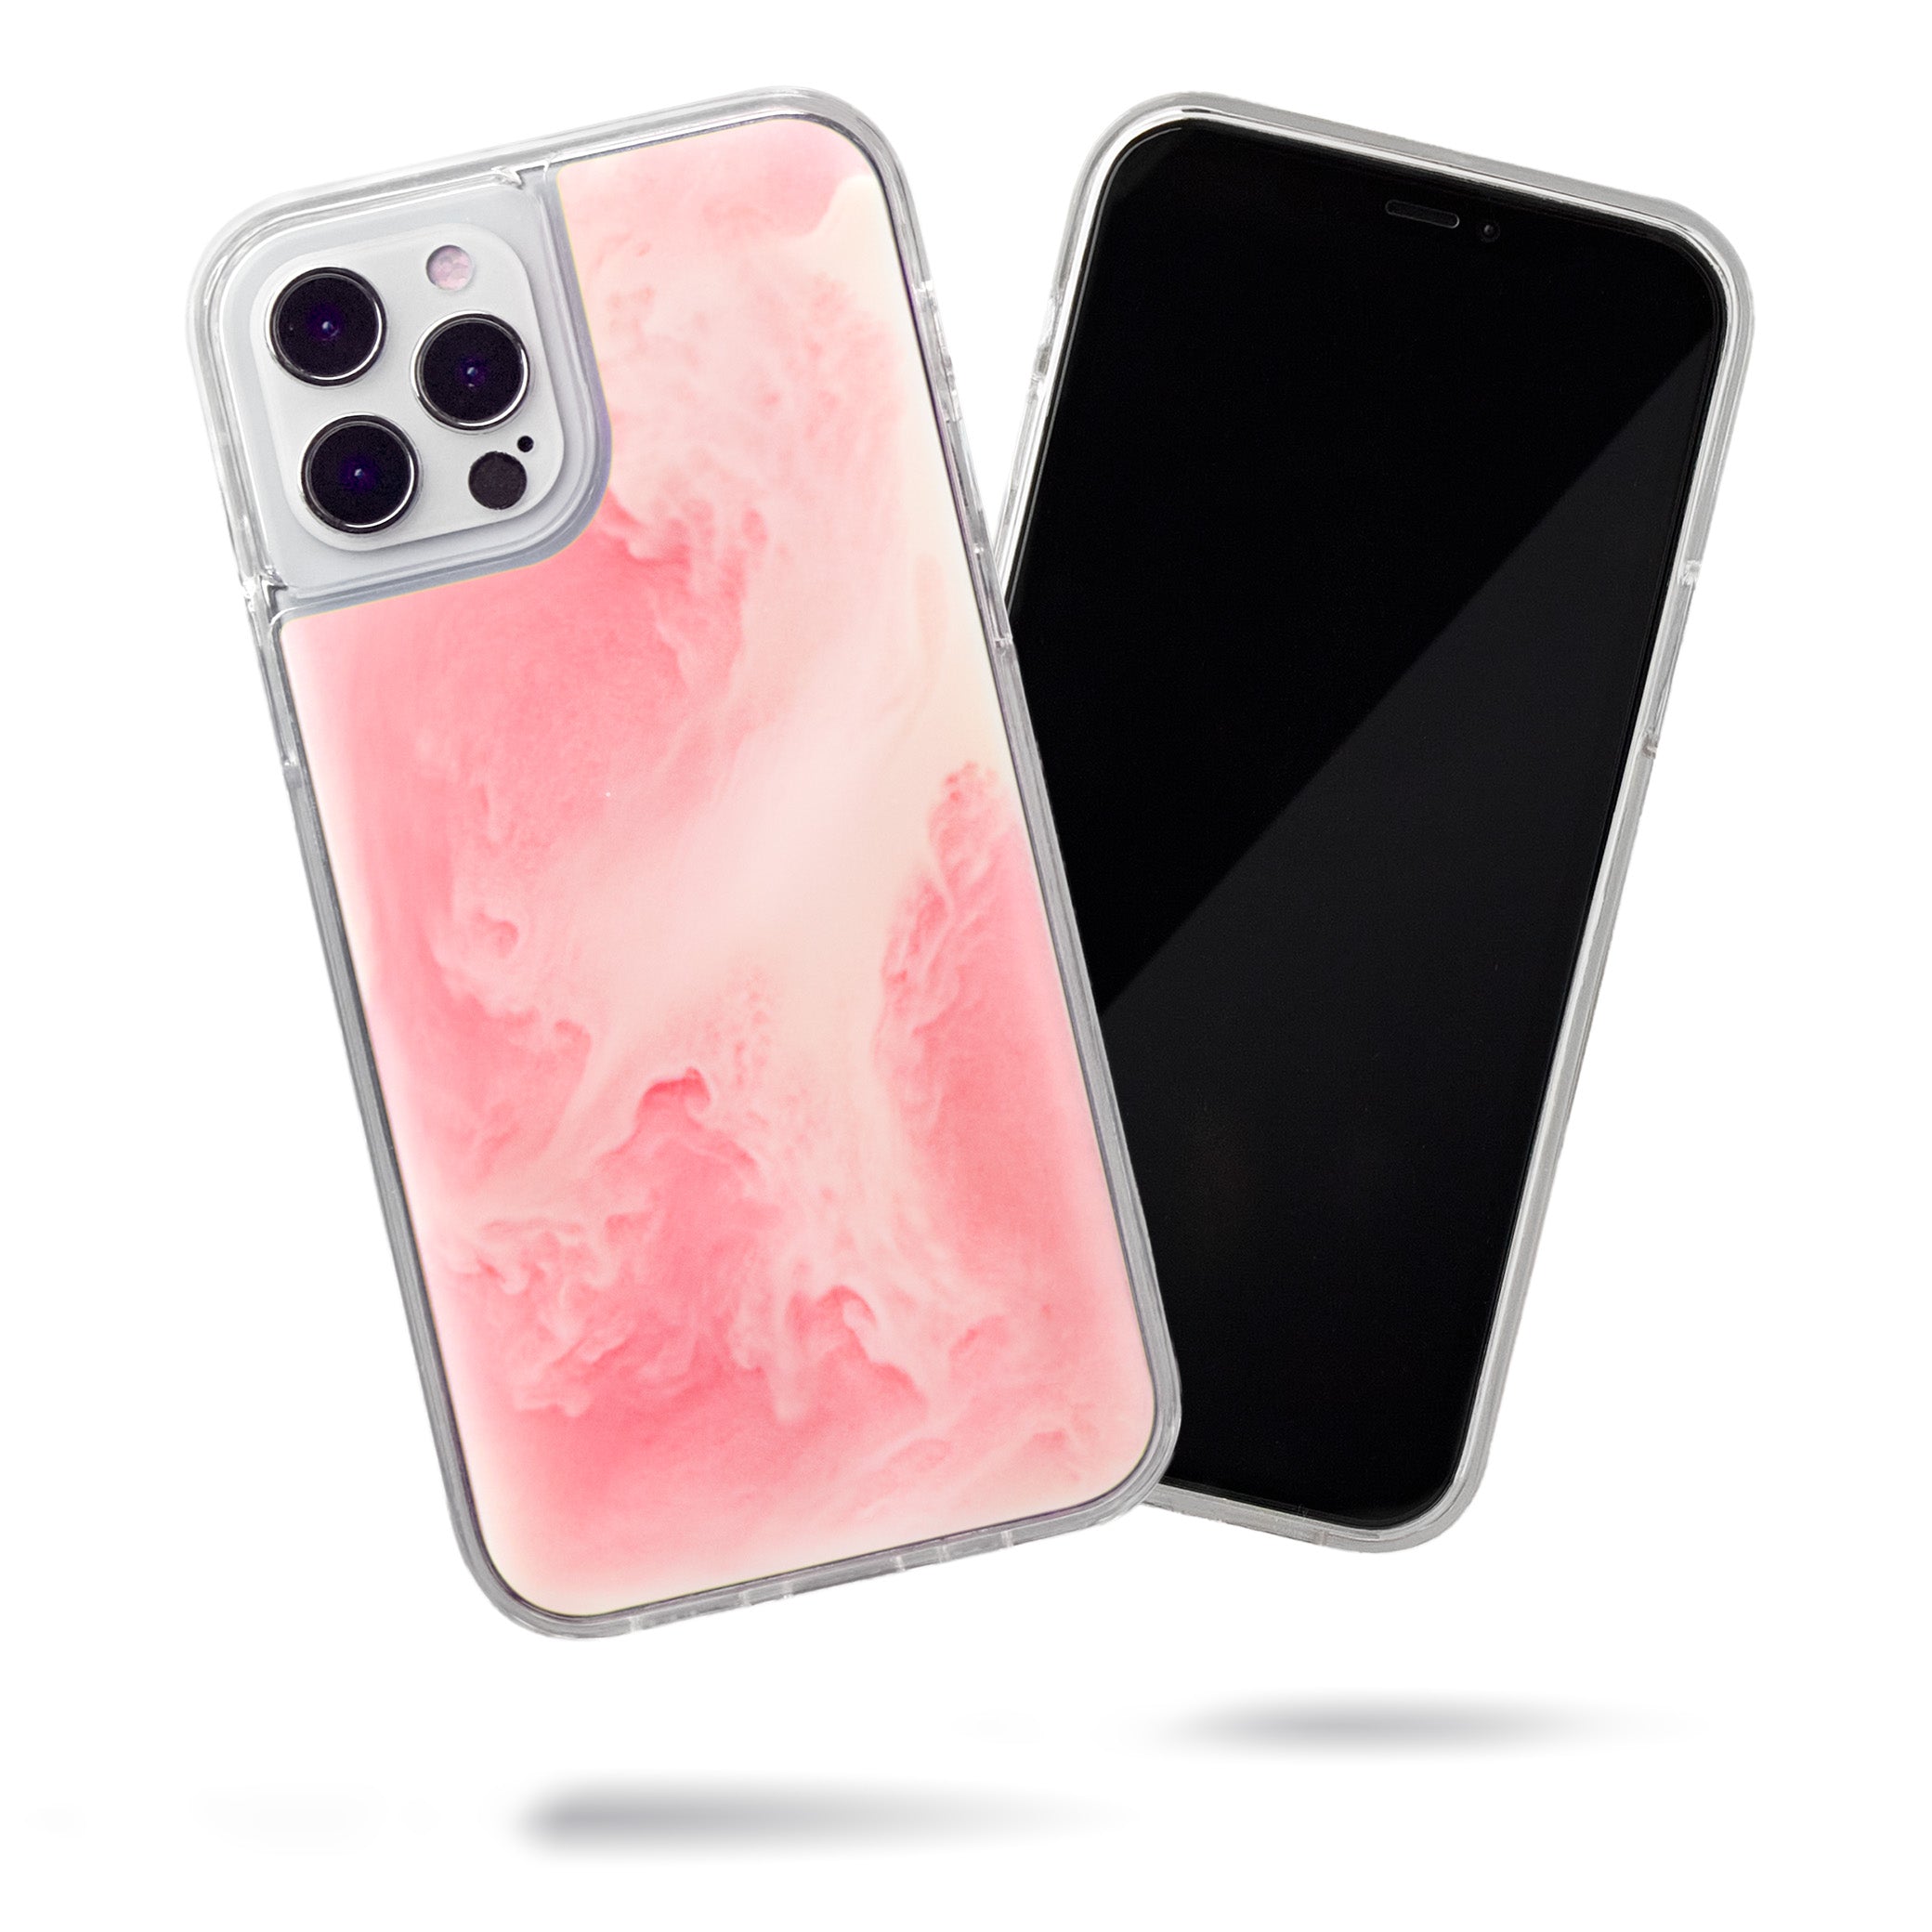 Neon Sand Case for iPhone 12 Pro Max - Pink Peach n Sand